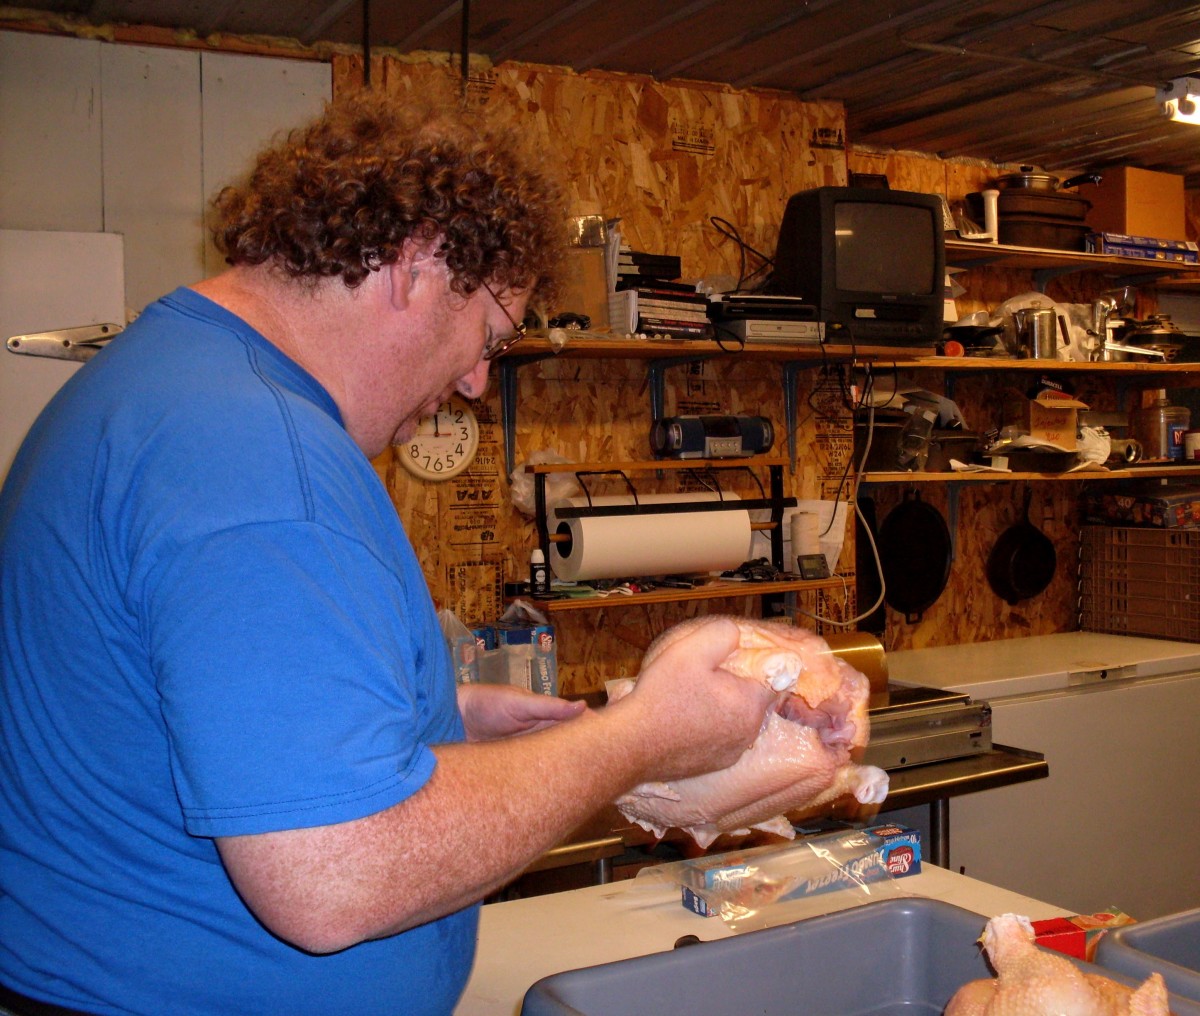 At 6-1/2 ft. and 300-something lbs., our friend Mark makes these chickens look easy to handle. It helps to have someone with big hands package big birds.